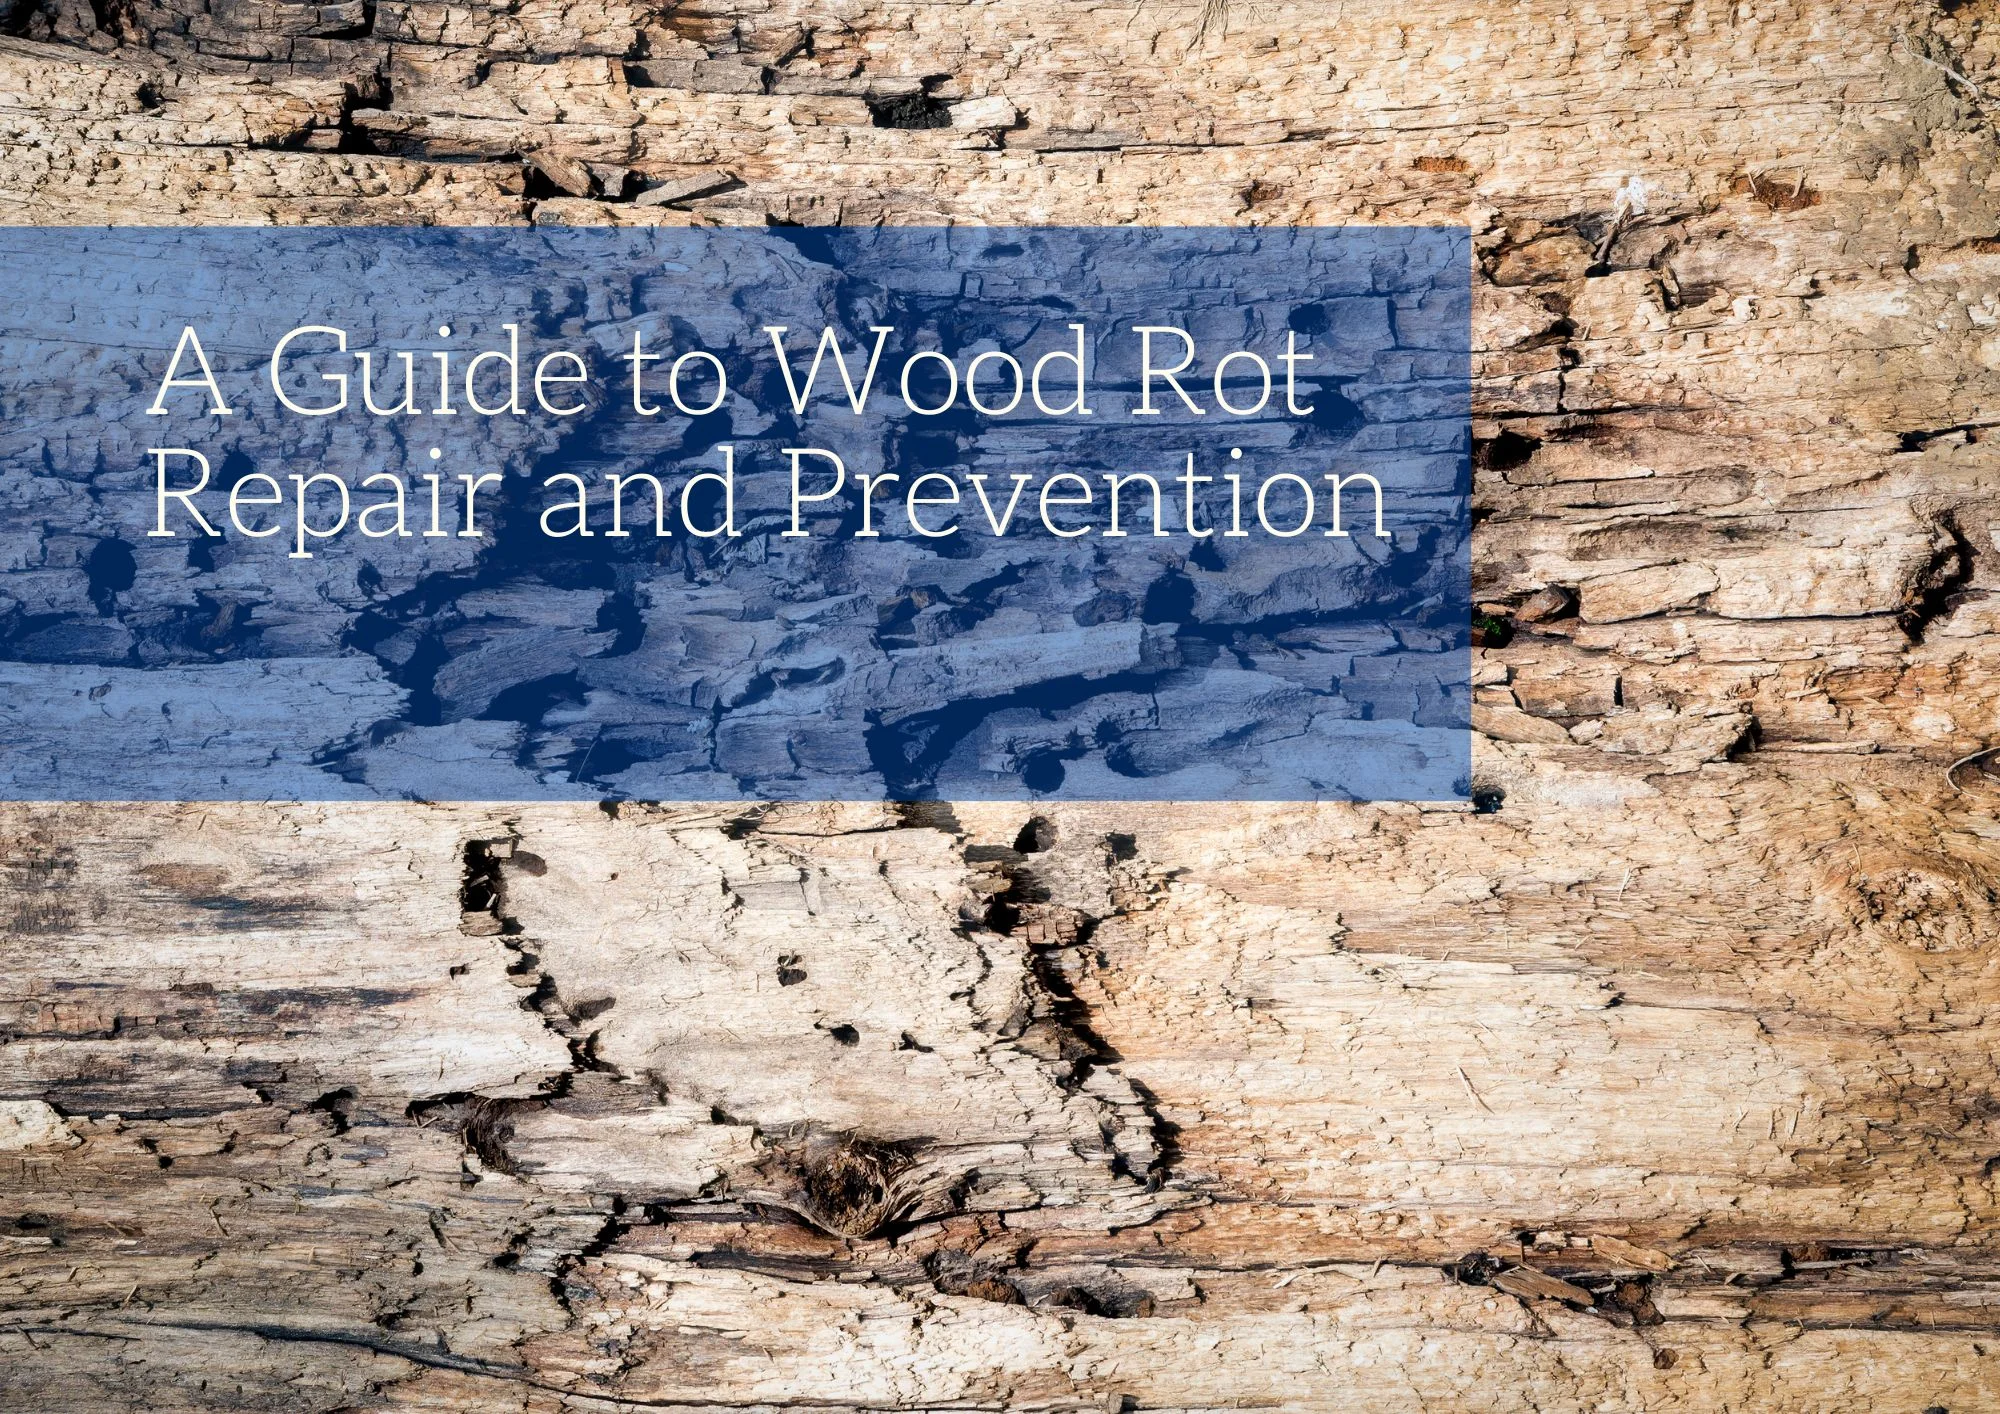 A Guide to Wood Rot Repair and Prevention